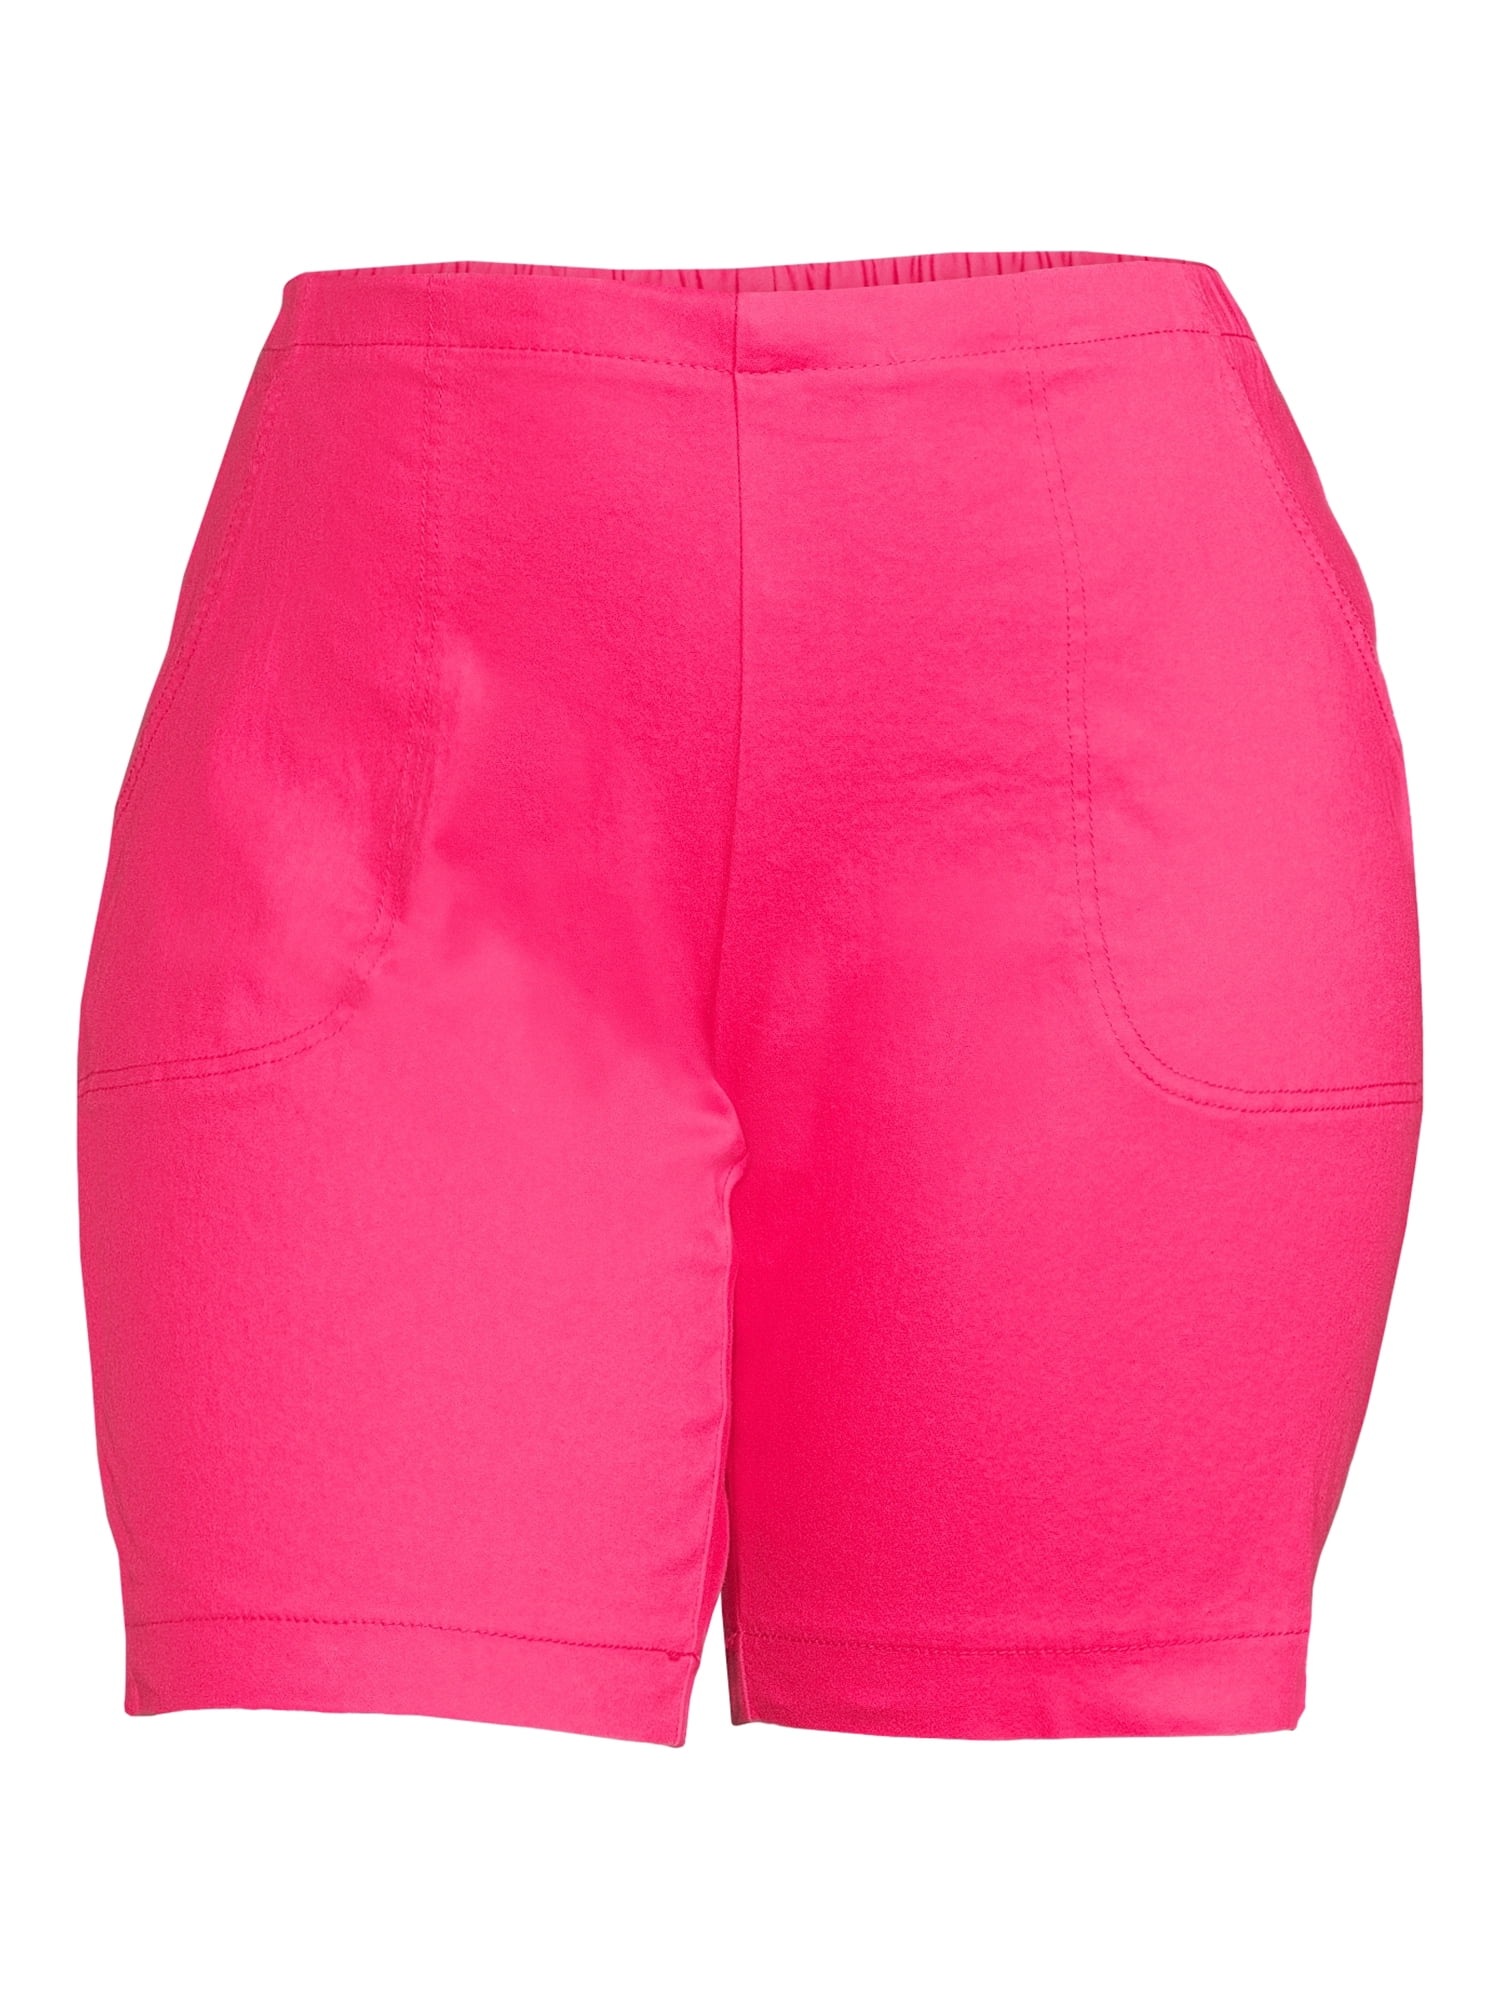 Just My Size Women's Plus Size 2 Pocket Pull-On Shorts 